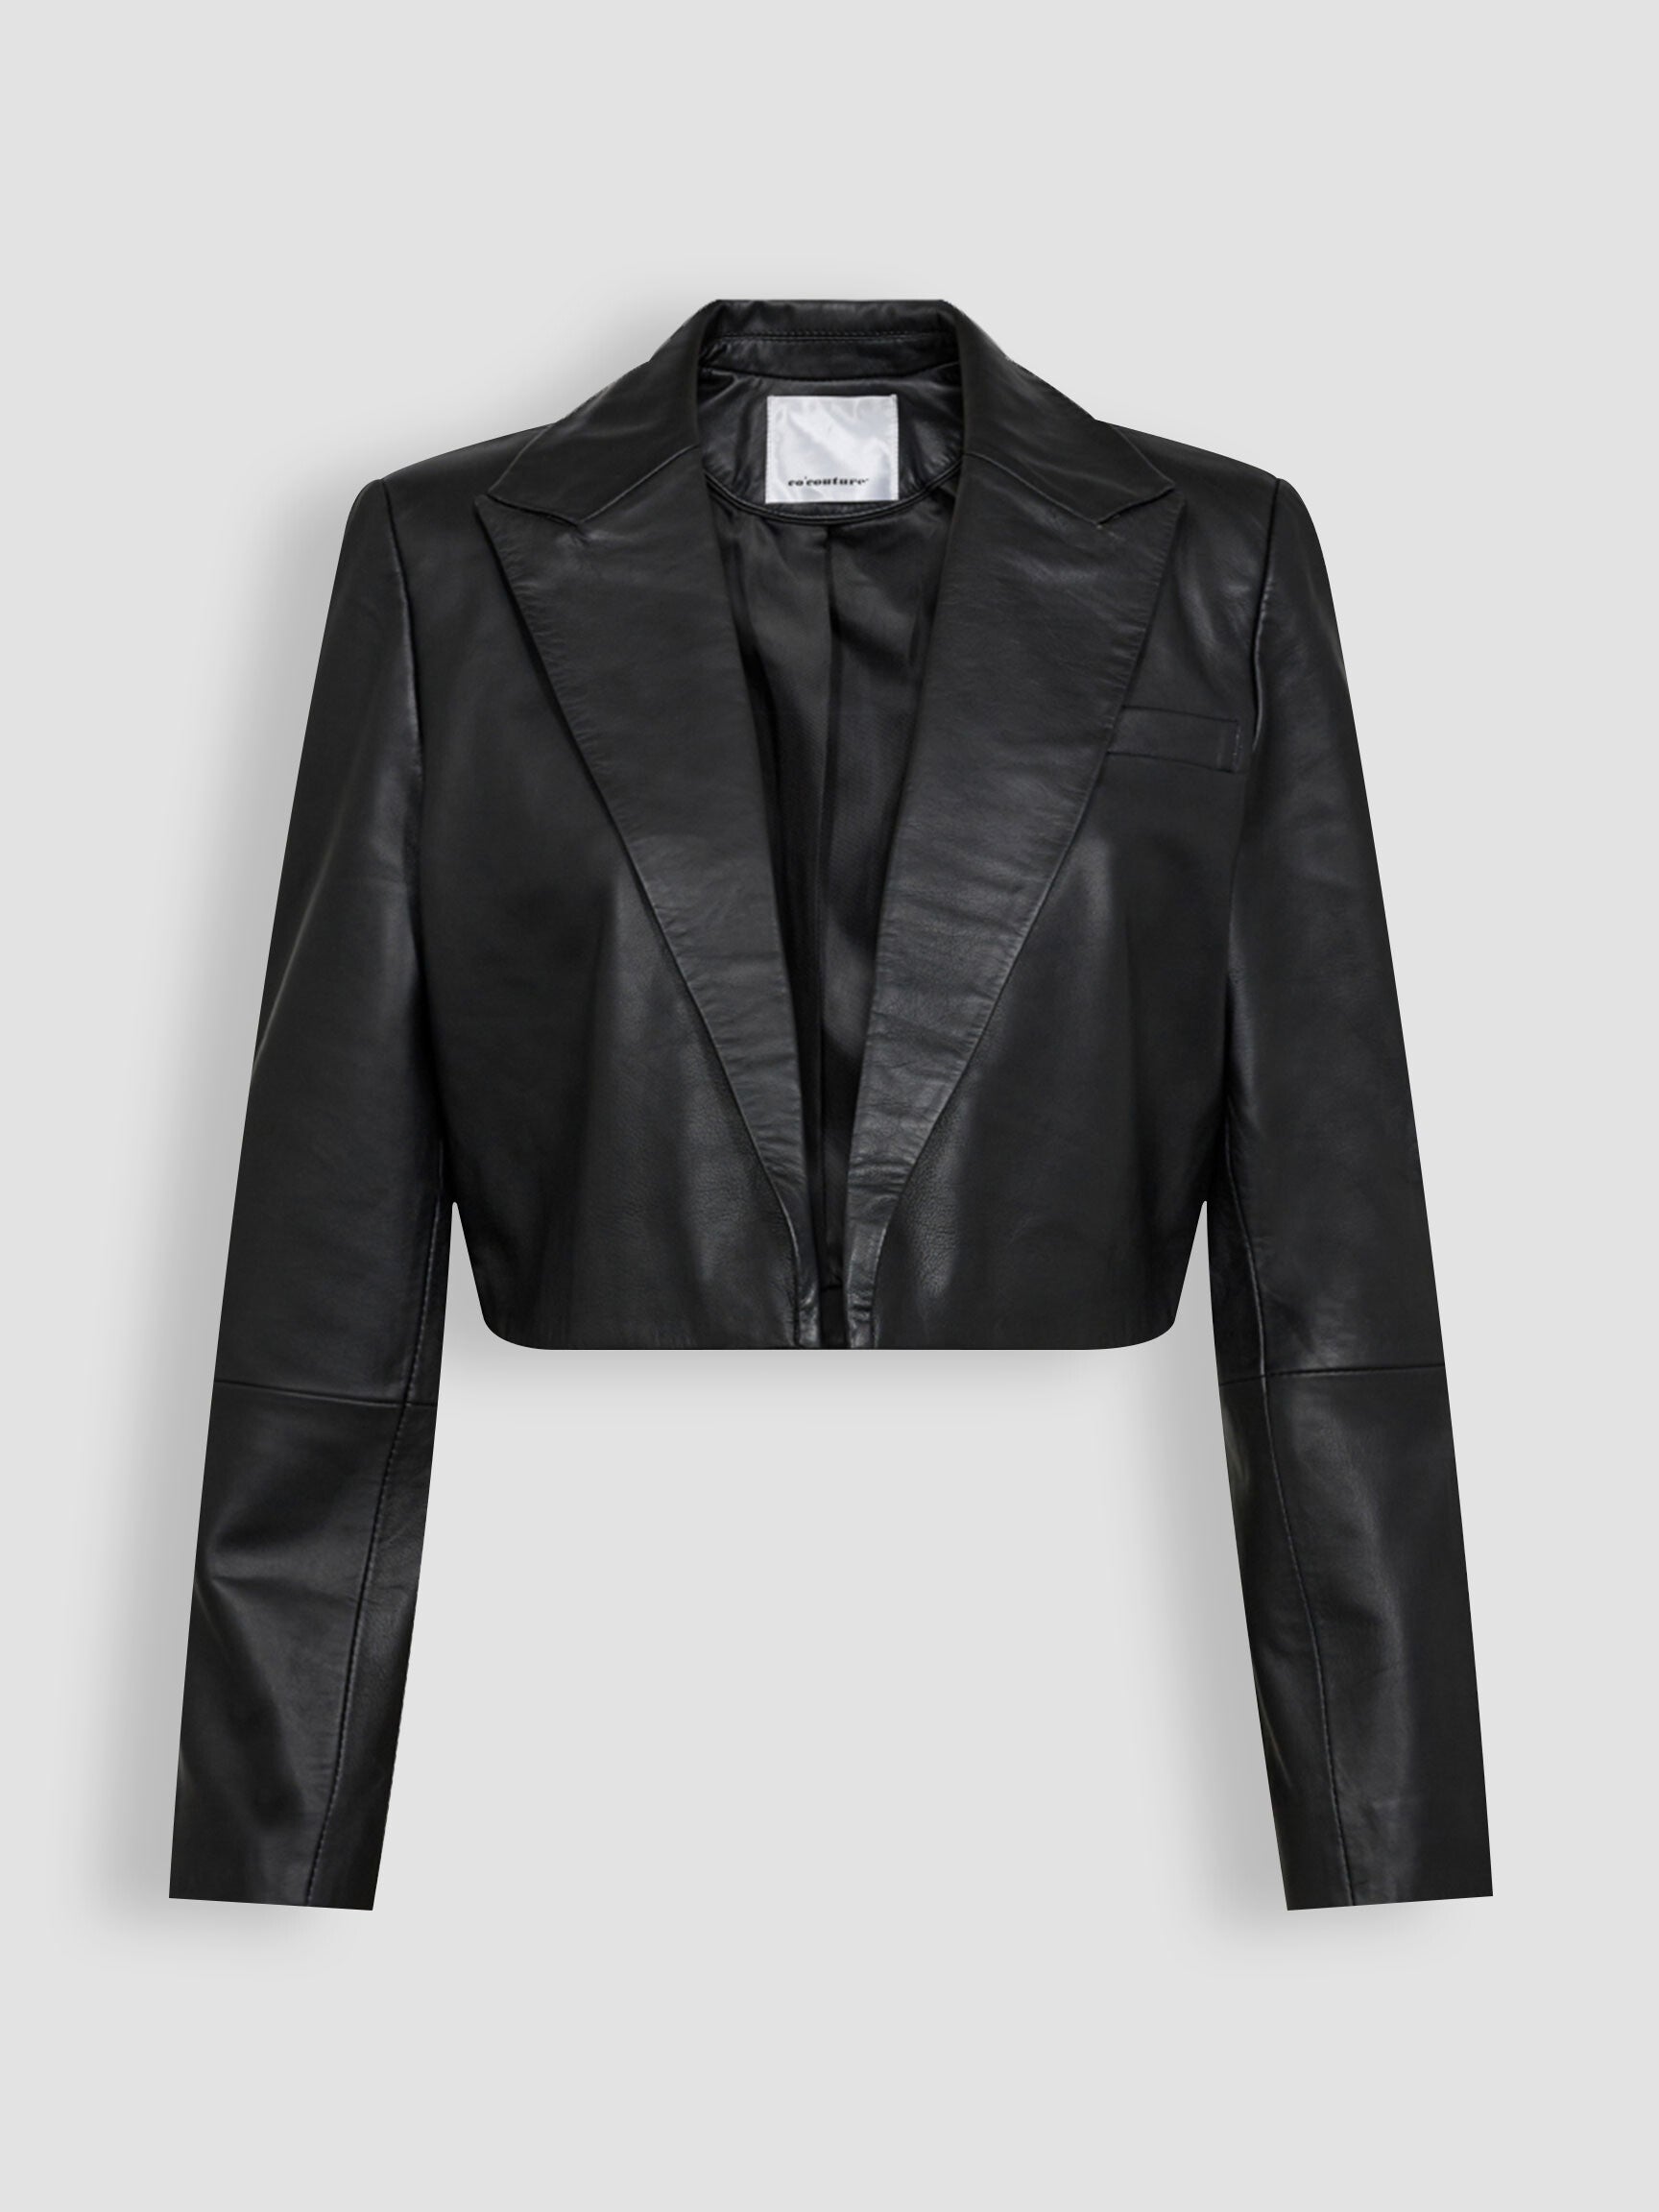 Co'Couture - Phoebe Leather Crop Blazer